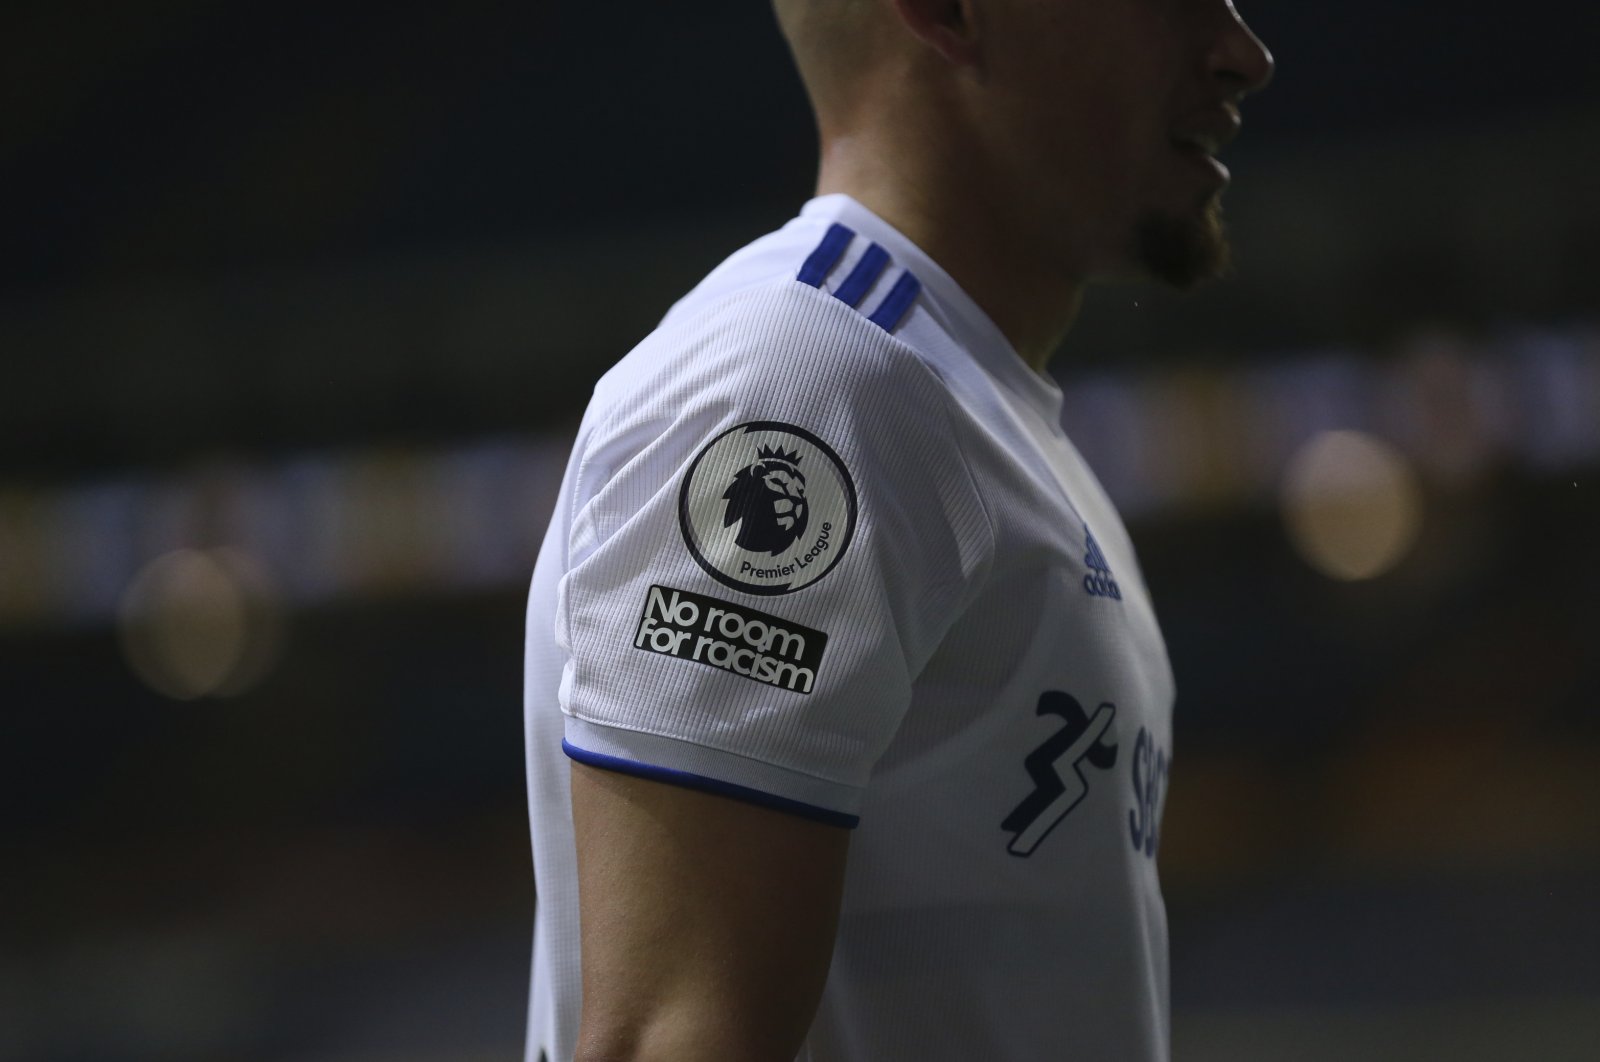 A Leeds United player features a &quot;No room for racism&quot; badge on his shirt, during a Premier League match against Wolves, Leeds, England, Oct. 19, 2020. (AP Photo)